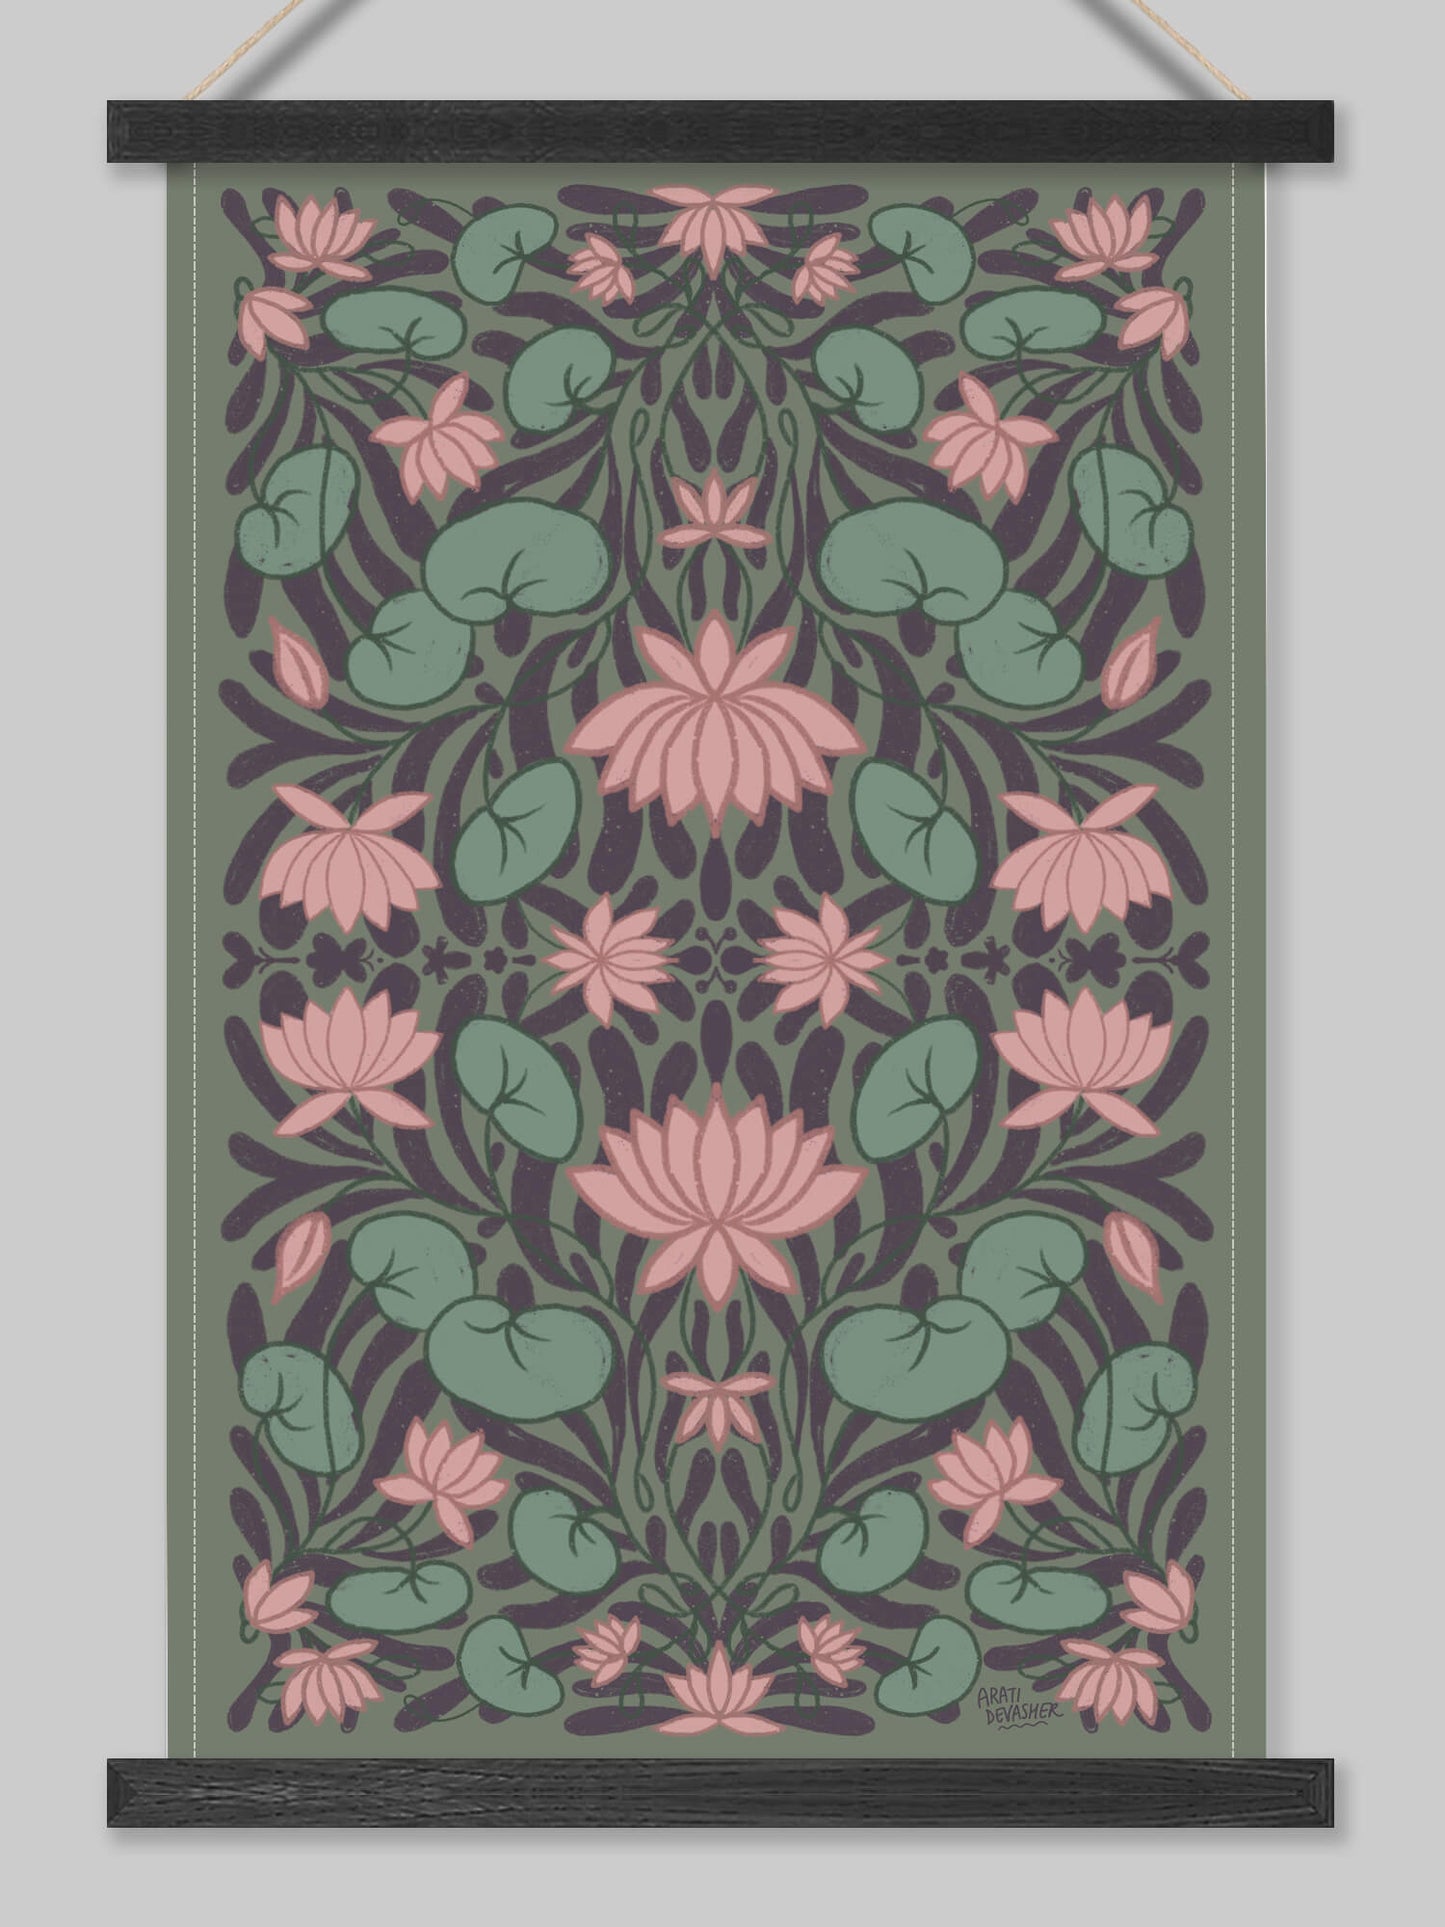 Floral: Lotus Garden – (end of line) tea towel or wall hanging